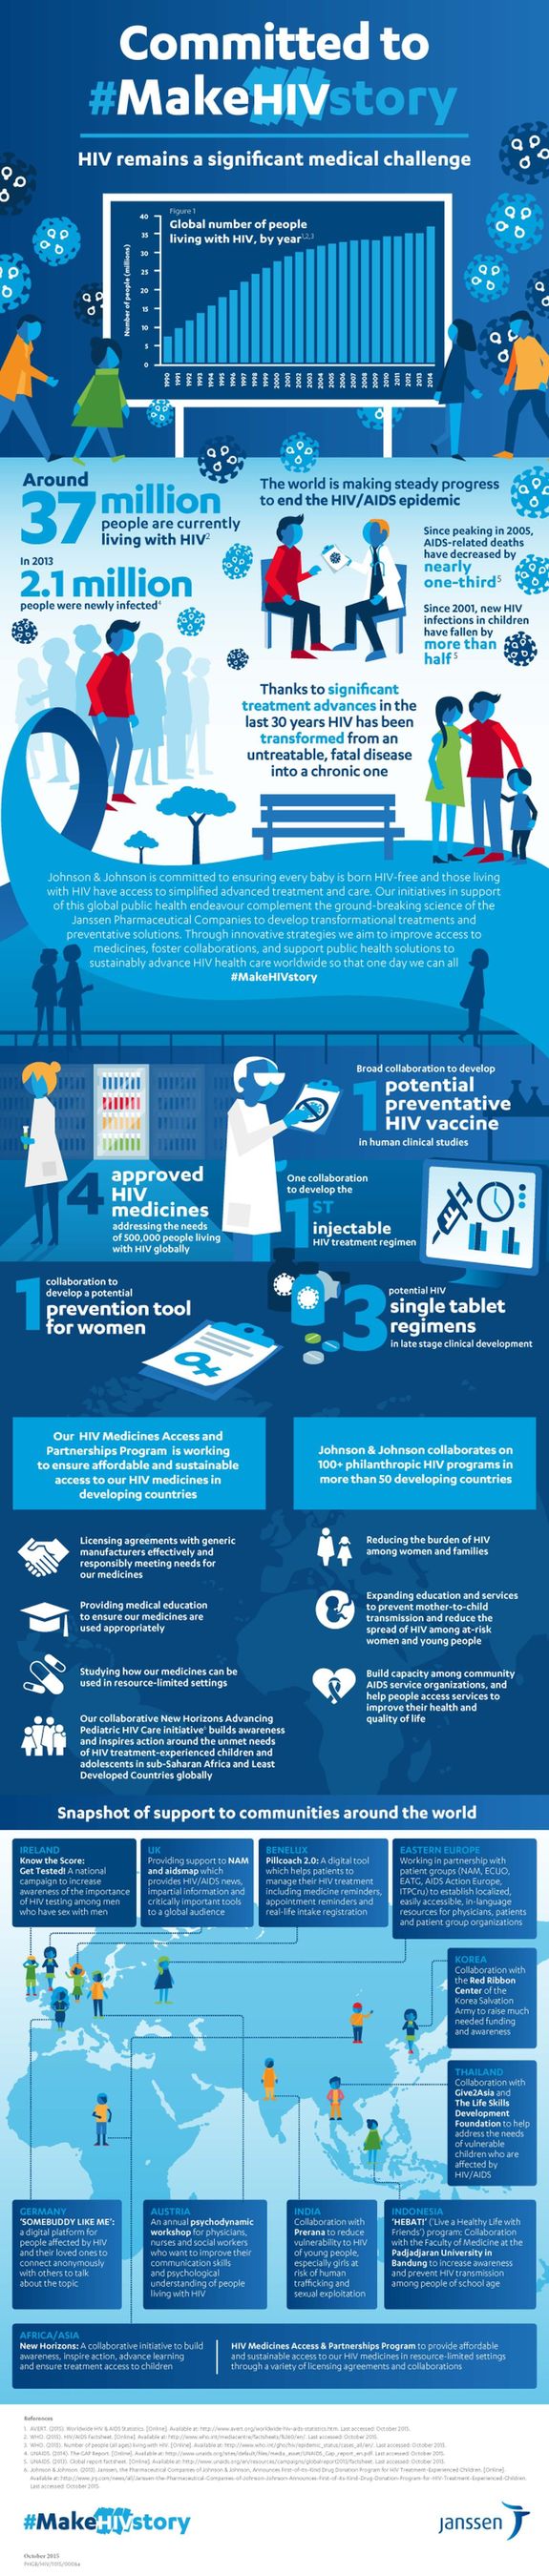 Learn more about HIV and what Janssen is doing to help #MakeHIVstory (PRNewsFoto/Janssen-Cilag International NV) (PRNewsFoto/Janssen-Cilag International NV)